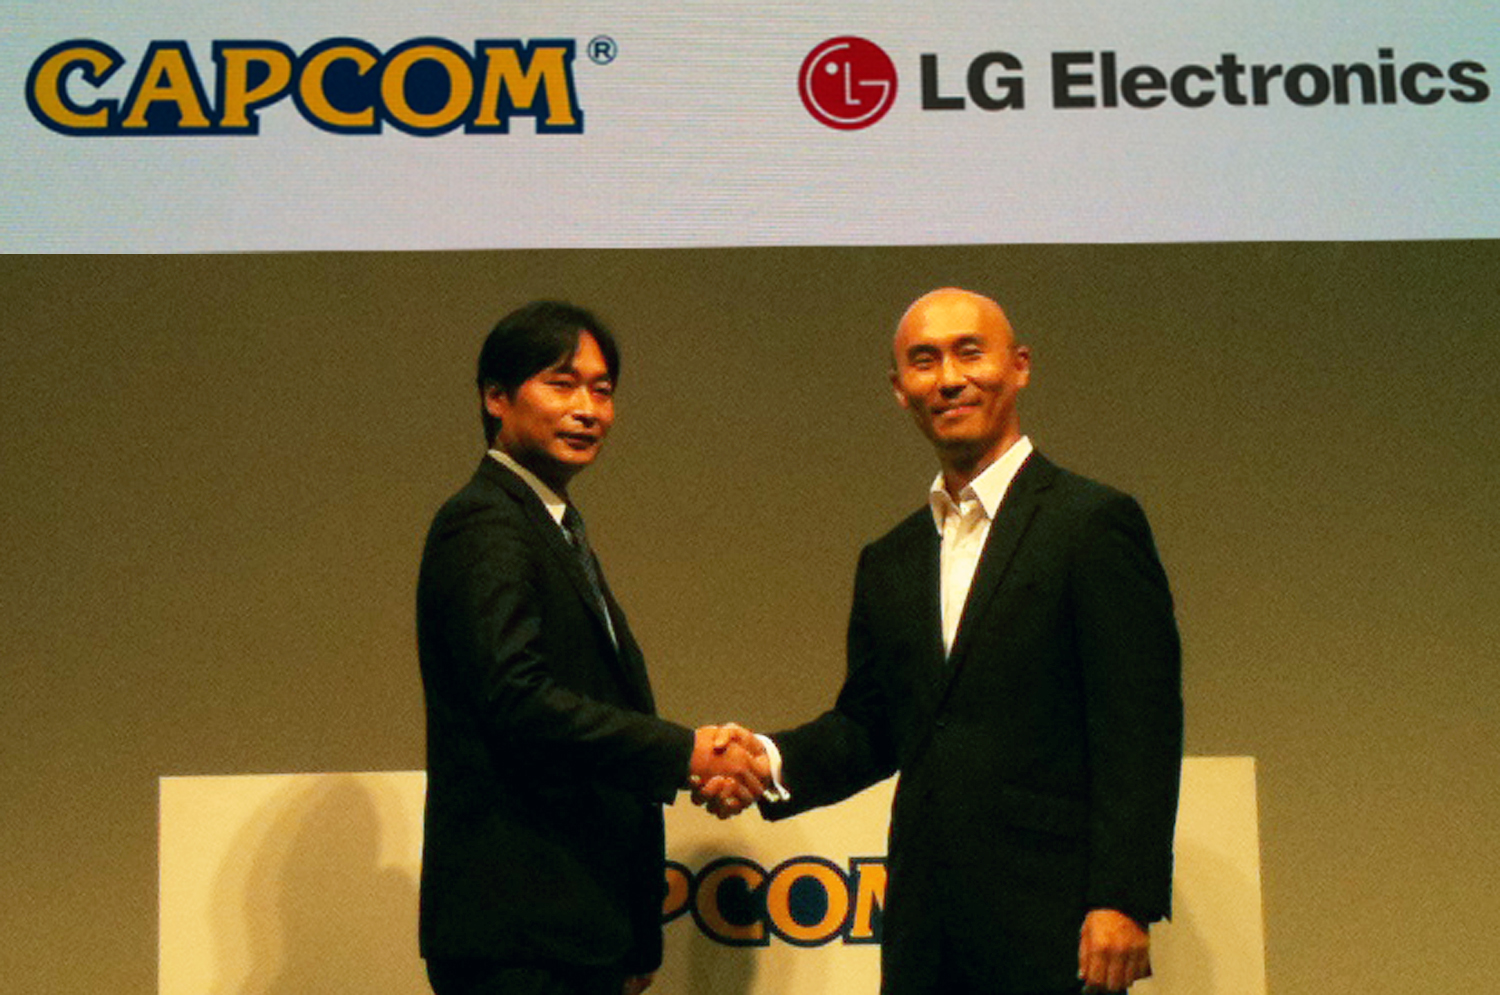 Representatives of LG Electronics Mobile Communications Company and CAPCOM are shaking hands